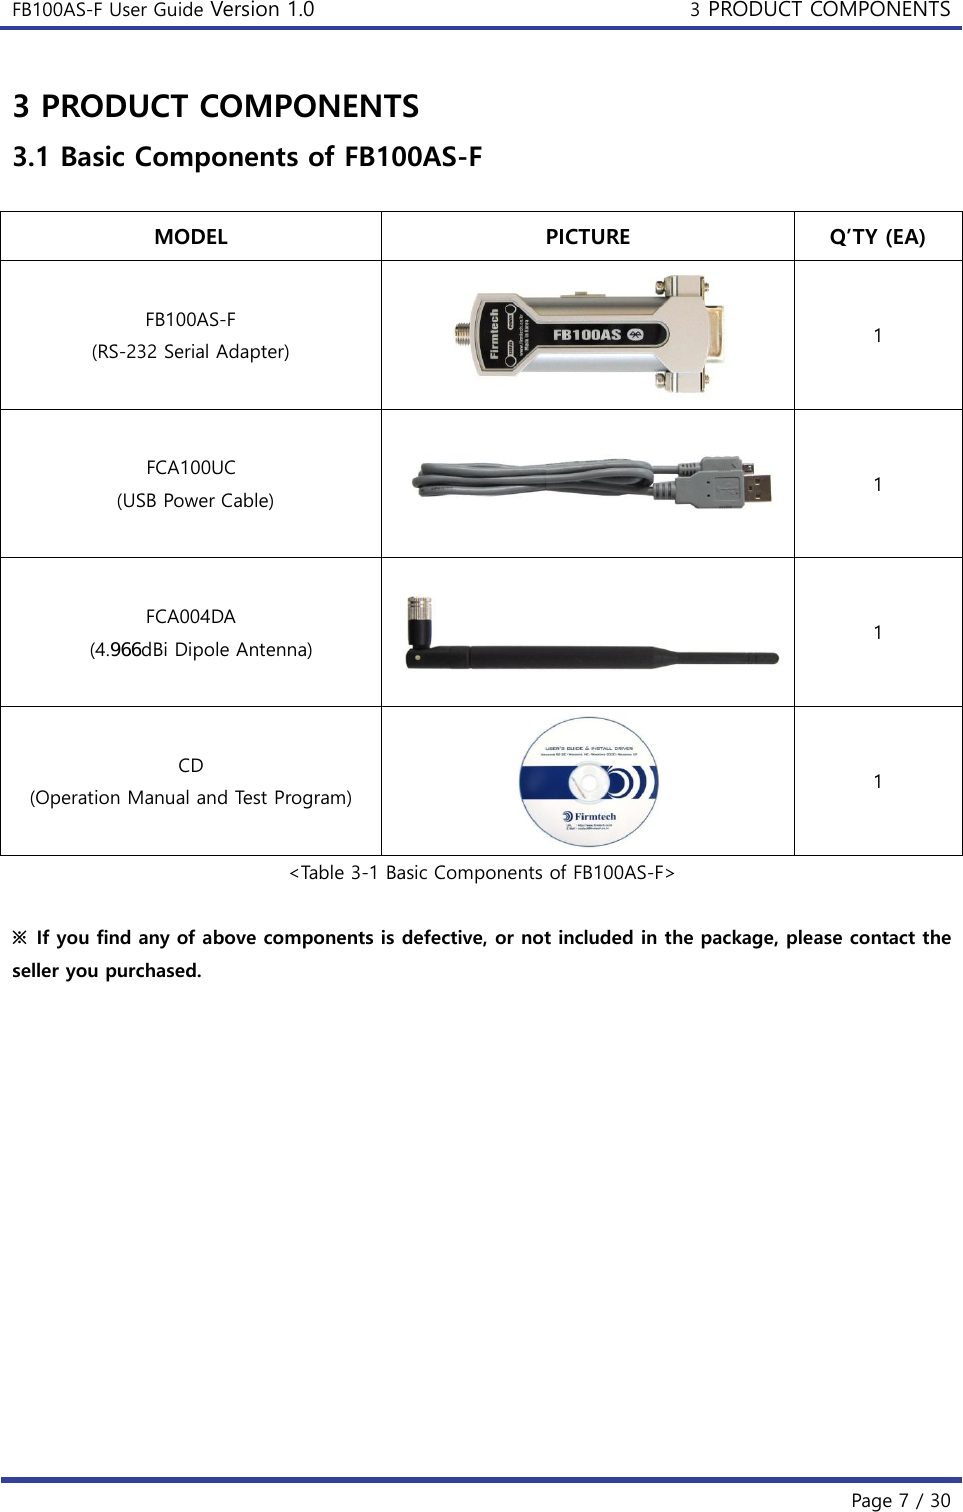 FB100AS-F User Guide Version 1.0 3 PRODUCT COMPONENTS   Page 7 / 30  3 PRODUCT COMPONENTS 3.1 Basic Components of FB100AS-F  MODEL PICTURE Q’TY (EA) FB100AS-F (RS-232 Serial Adapter)  1 FCA100UC   (USB Power Cable)  1 FCA004DA (4.dBi Dipole Antenna)  1 CD (Operation Manual and Test Program)  1 &lt;Table 3-1 Basic Components of FB100AS-F&gt;  ※  If you find any of above components is defective, or not included in the package, please contact the seller you purchased.    